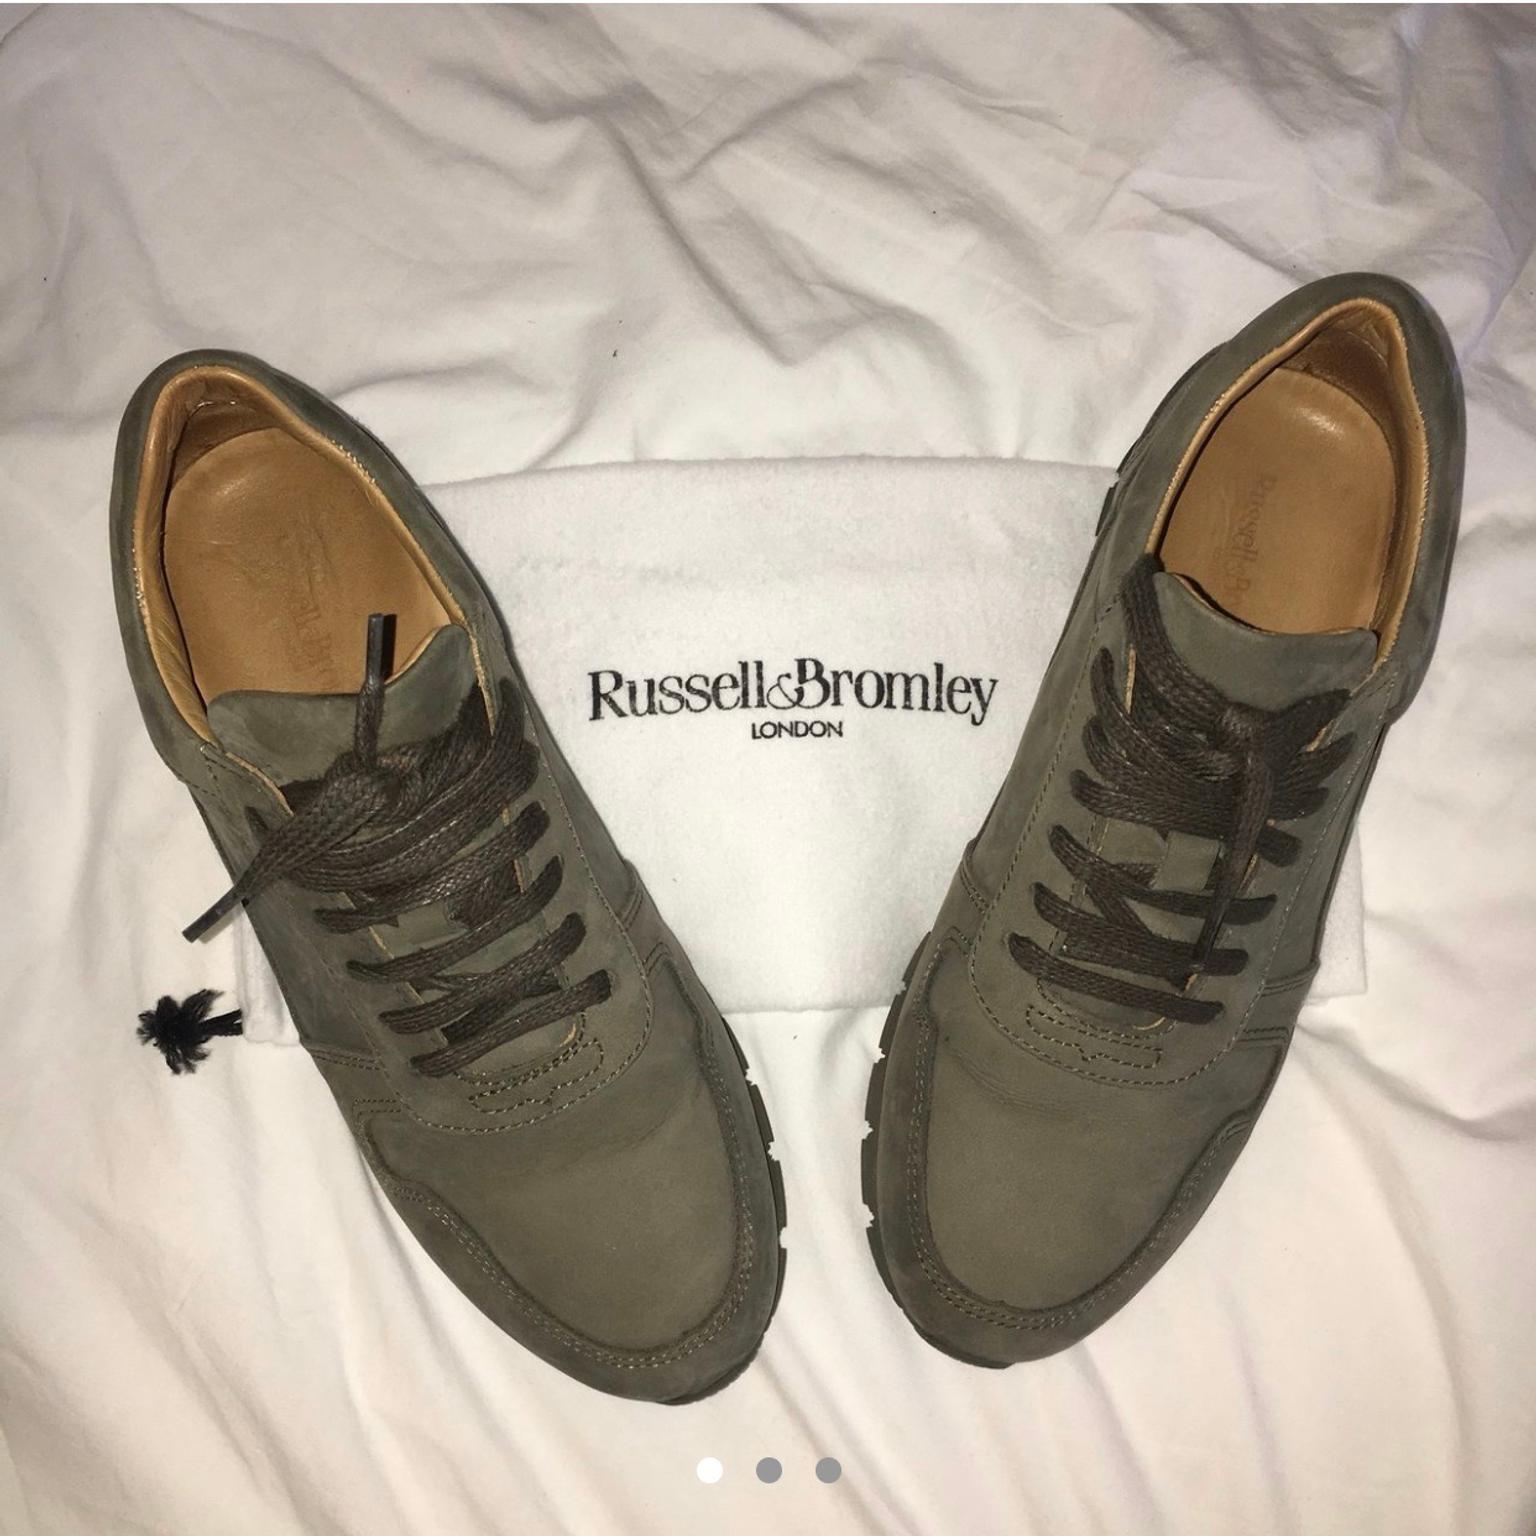 russell bromley mens shoes